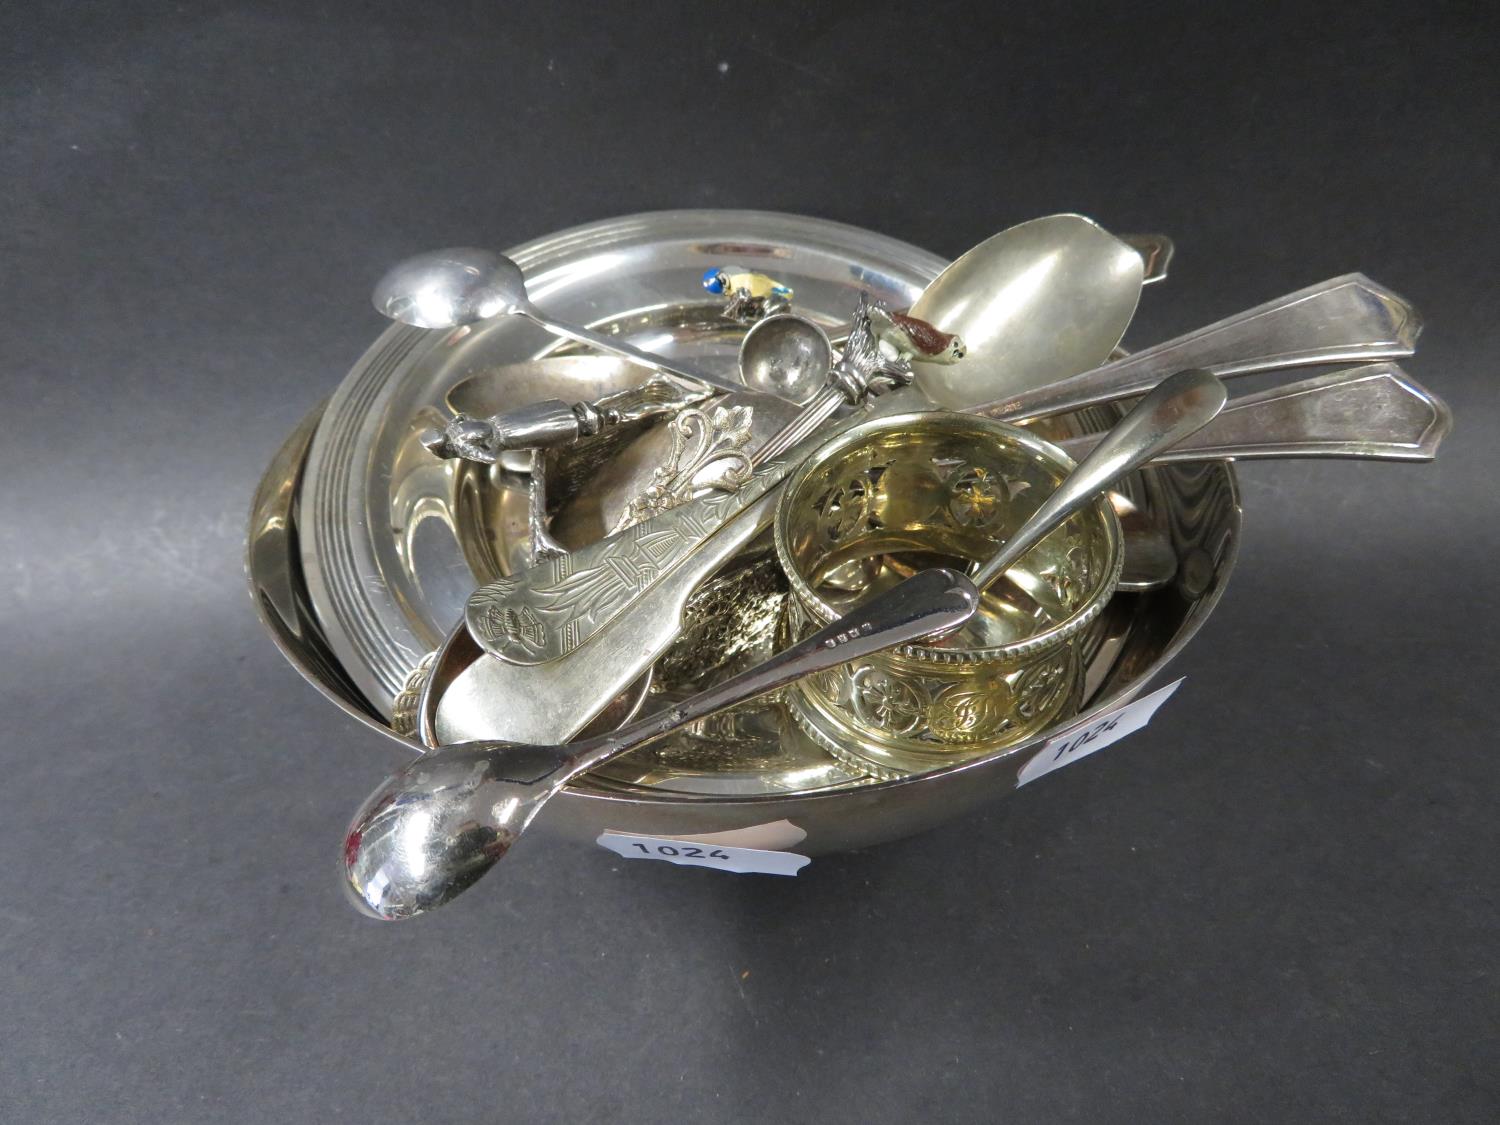 Box of coffee spoons and other plated ware - Image 2 of 3